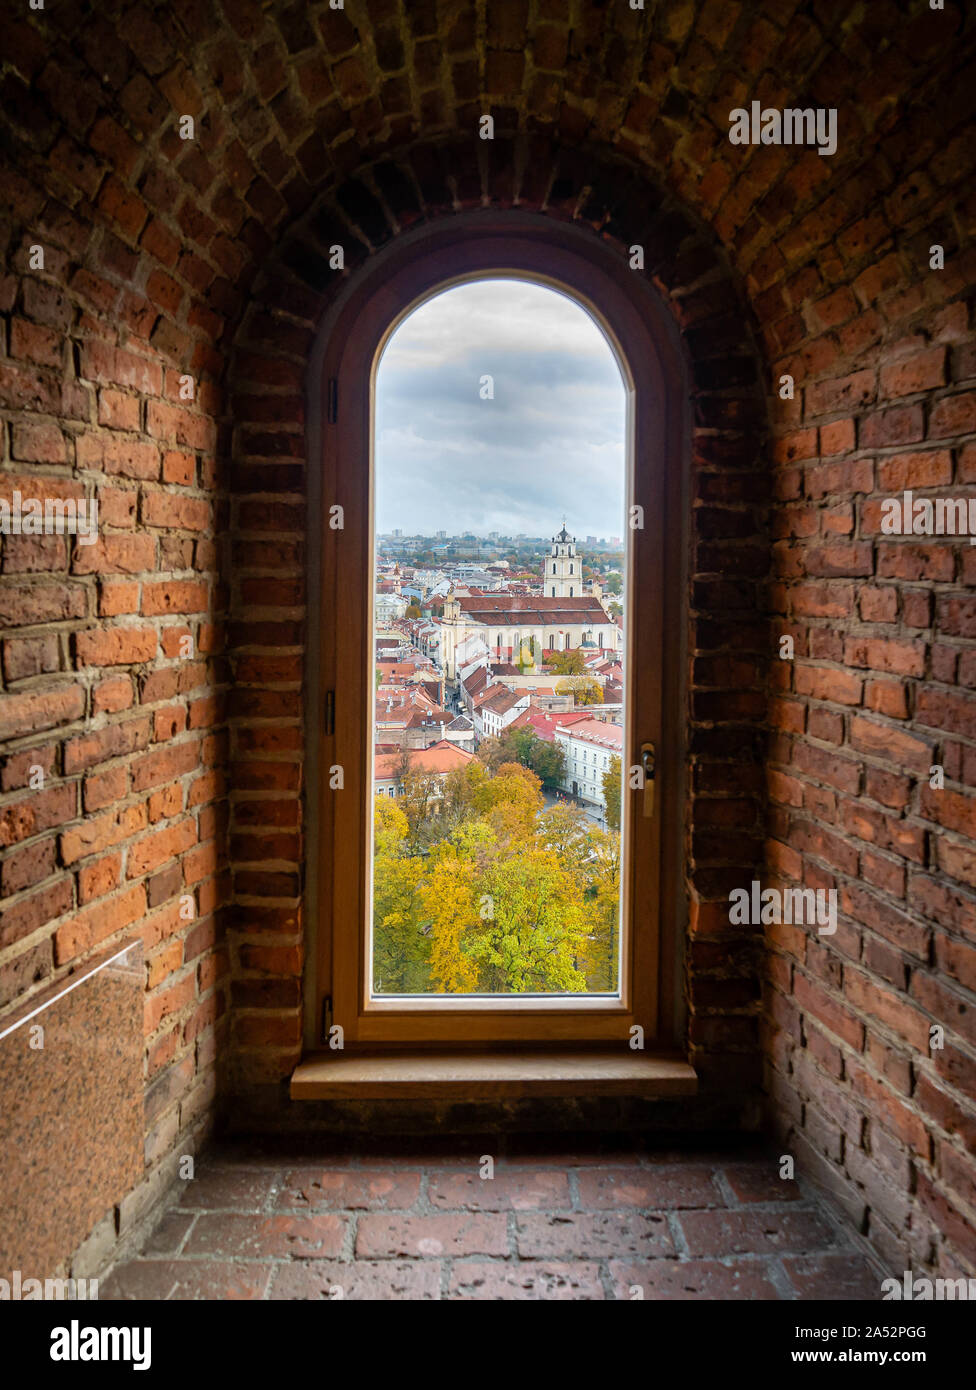 View through a window of the historic Gediminas tower across Old Town and a church in Vilnius, Lithuania Stock Photo